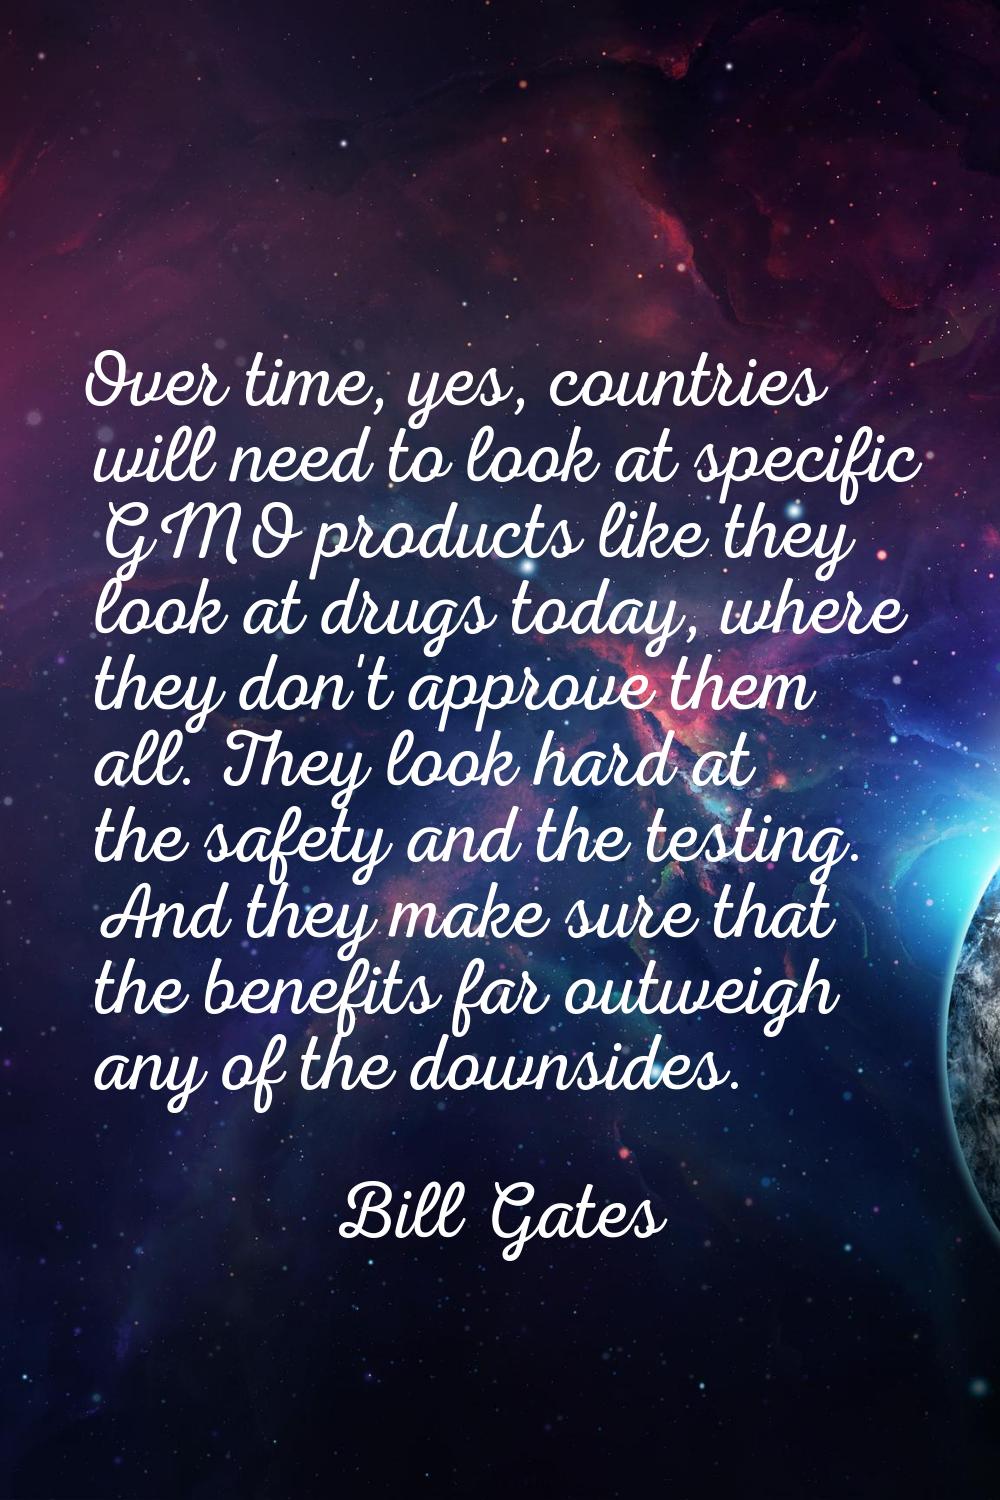 Over time, yes, countries will need to look at specific GMO products like they look at drugs today,